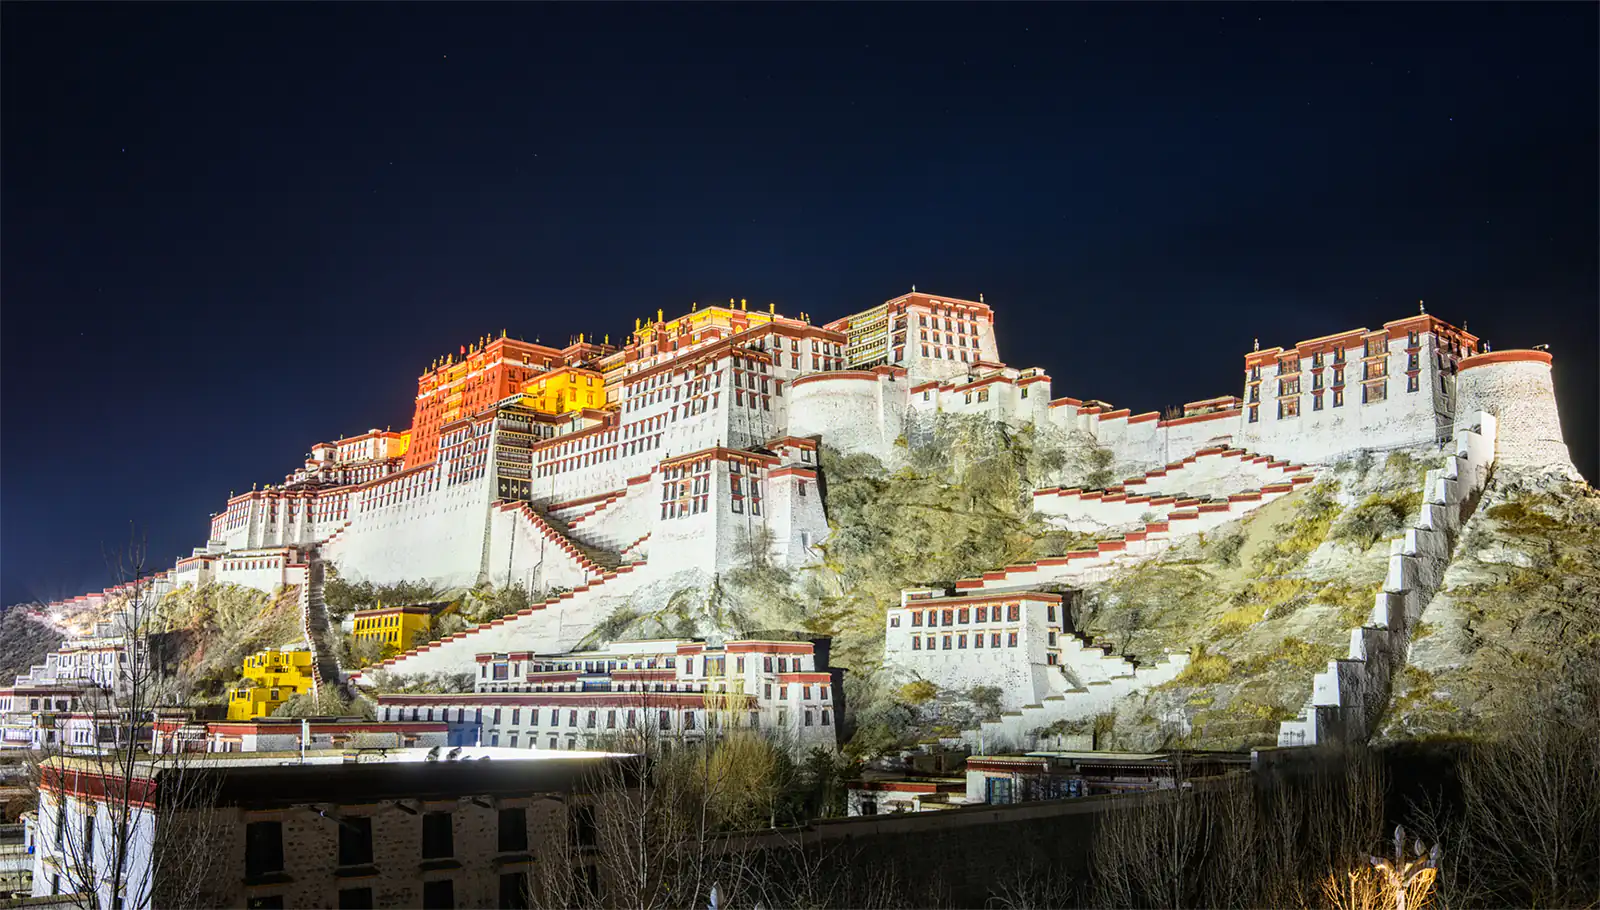 Potala is open for foreigners